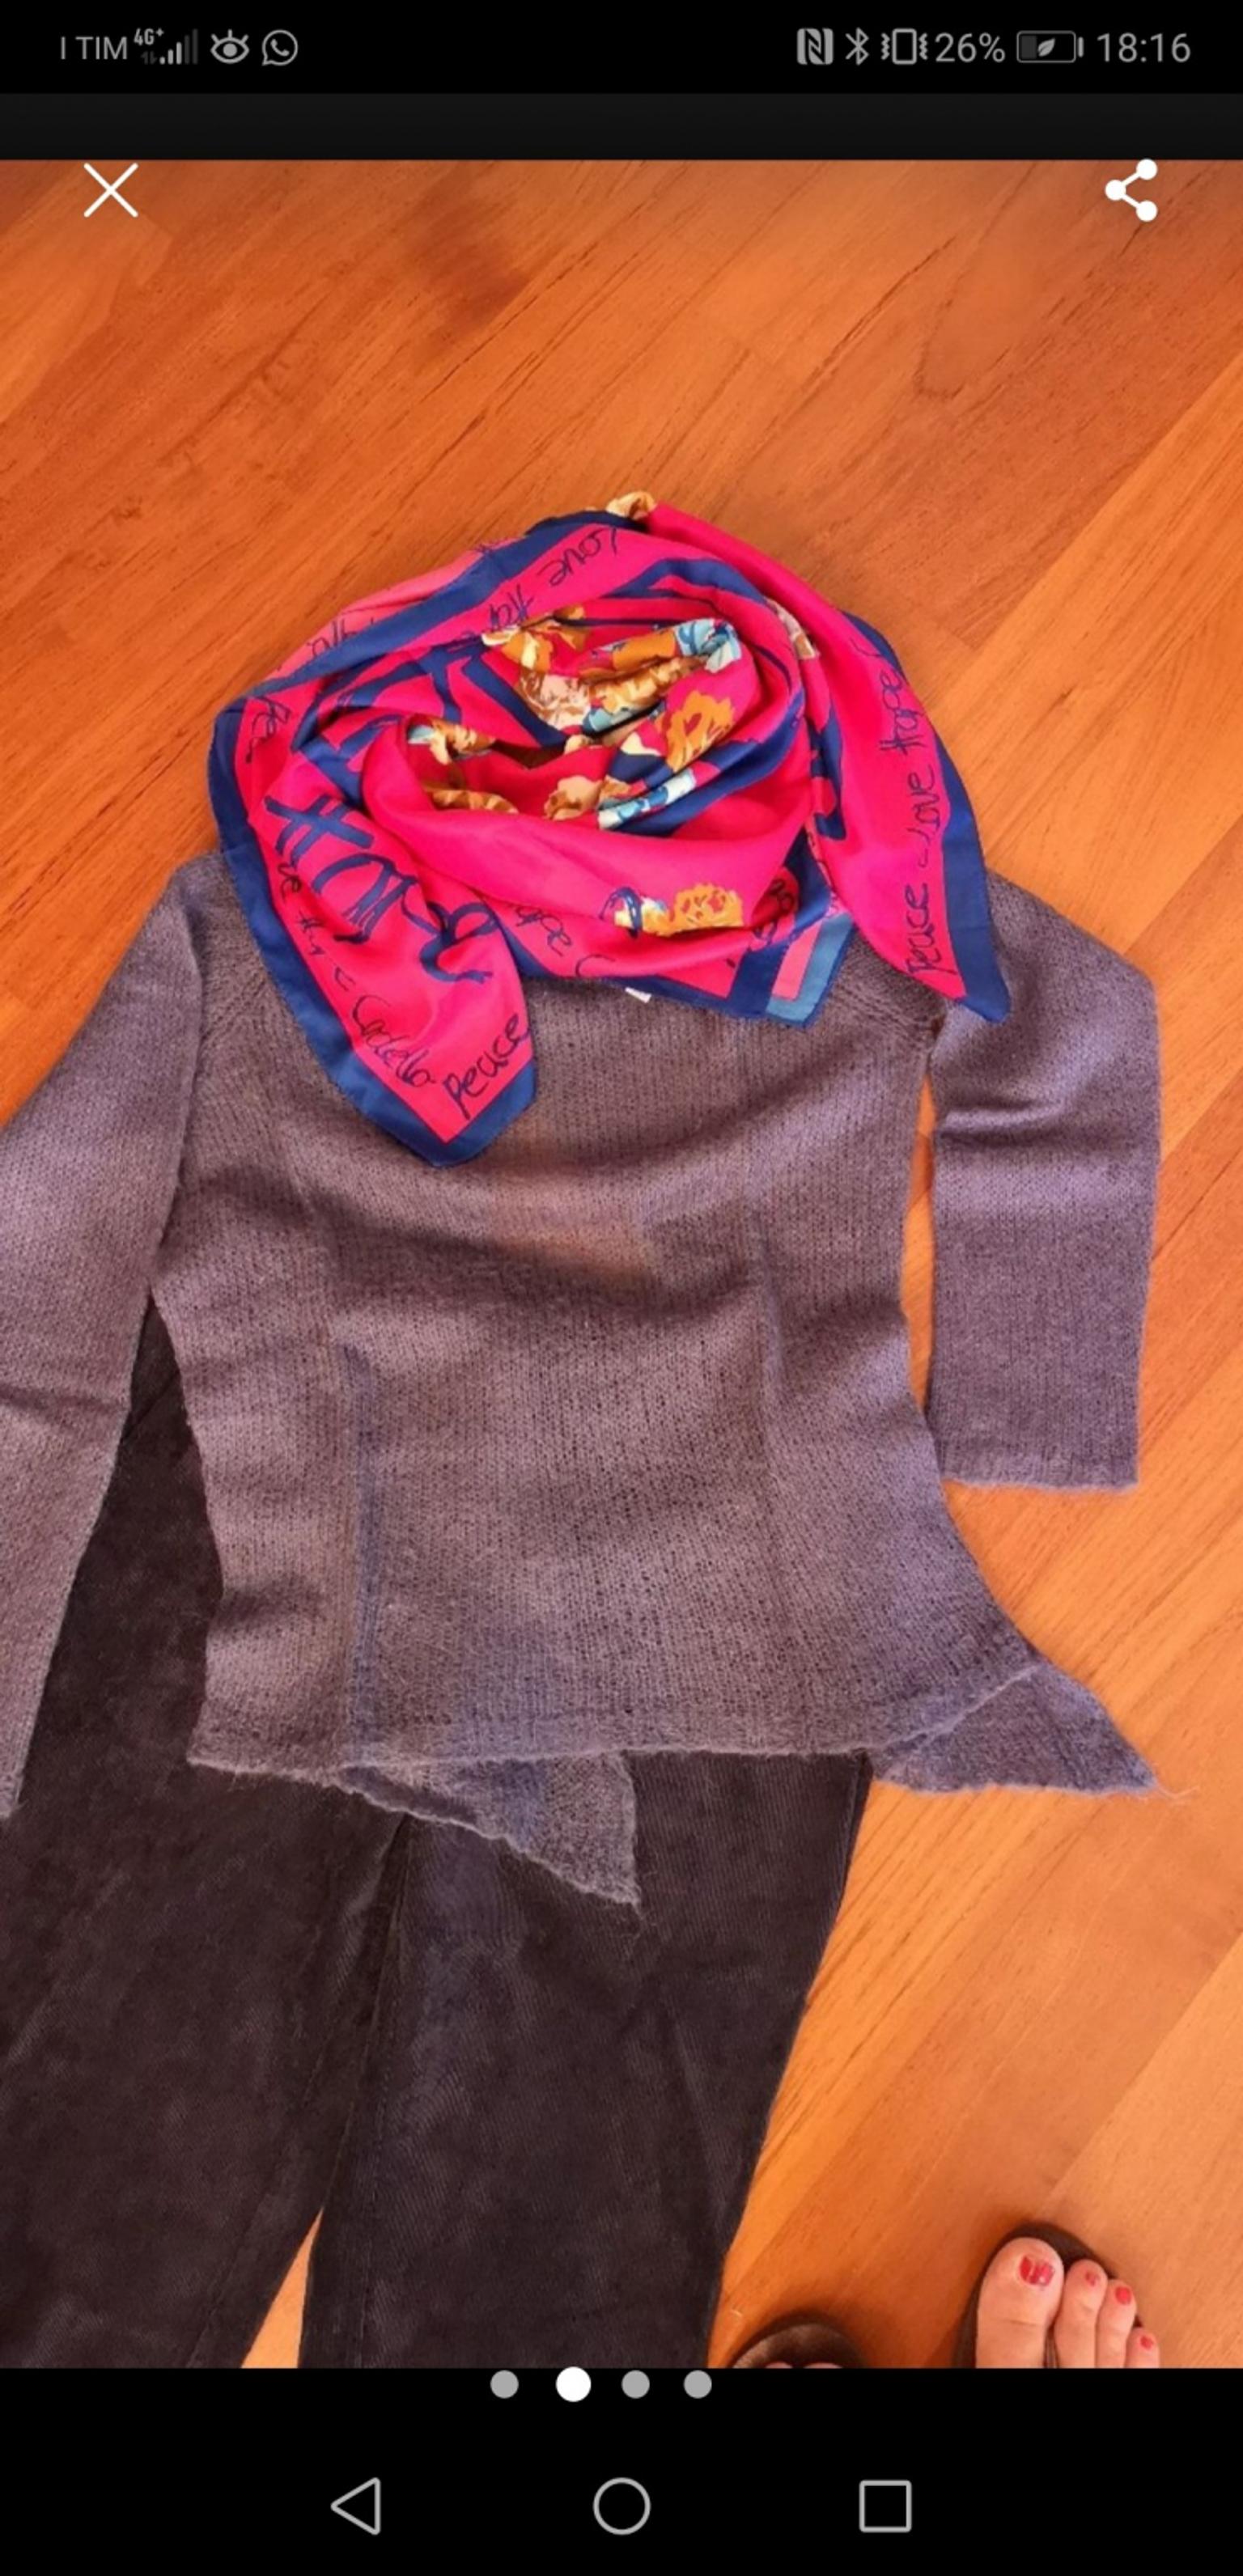 Outfit 5 In 57125 Livorno For 2300 For Sale Shpock